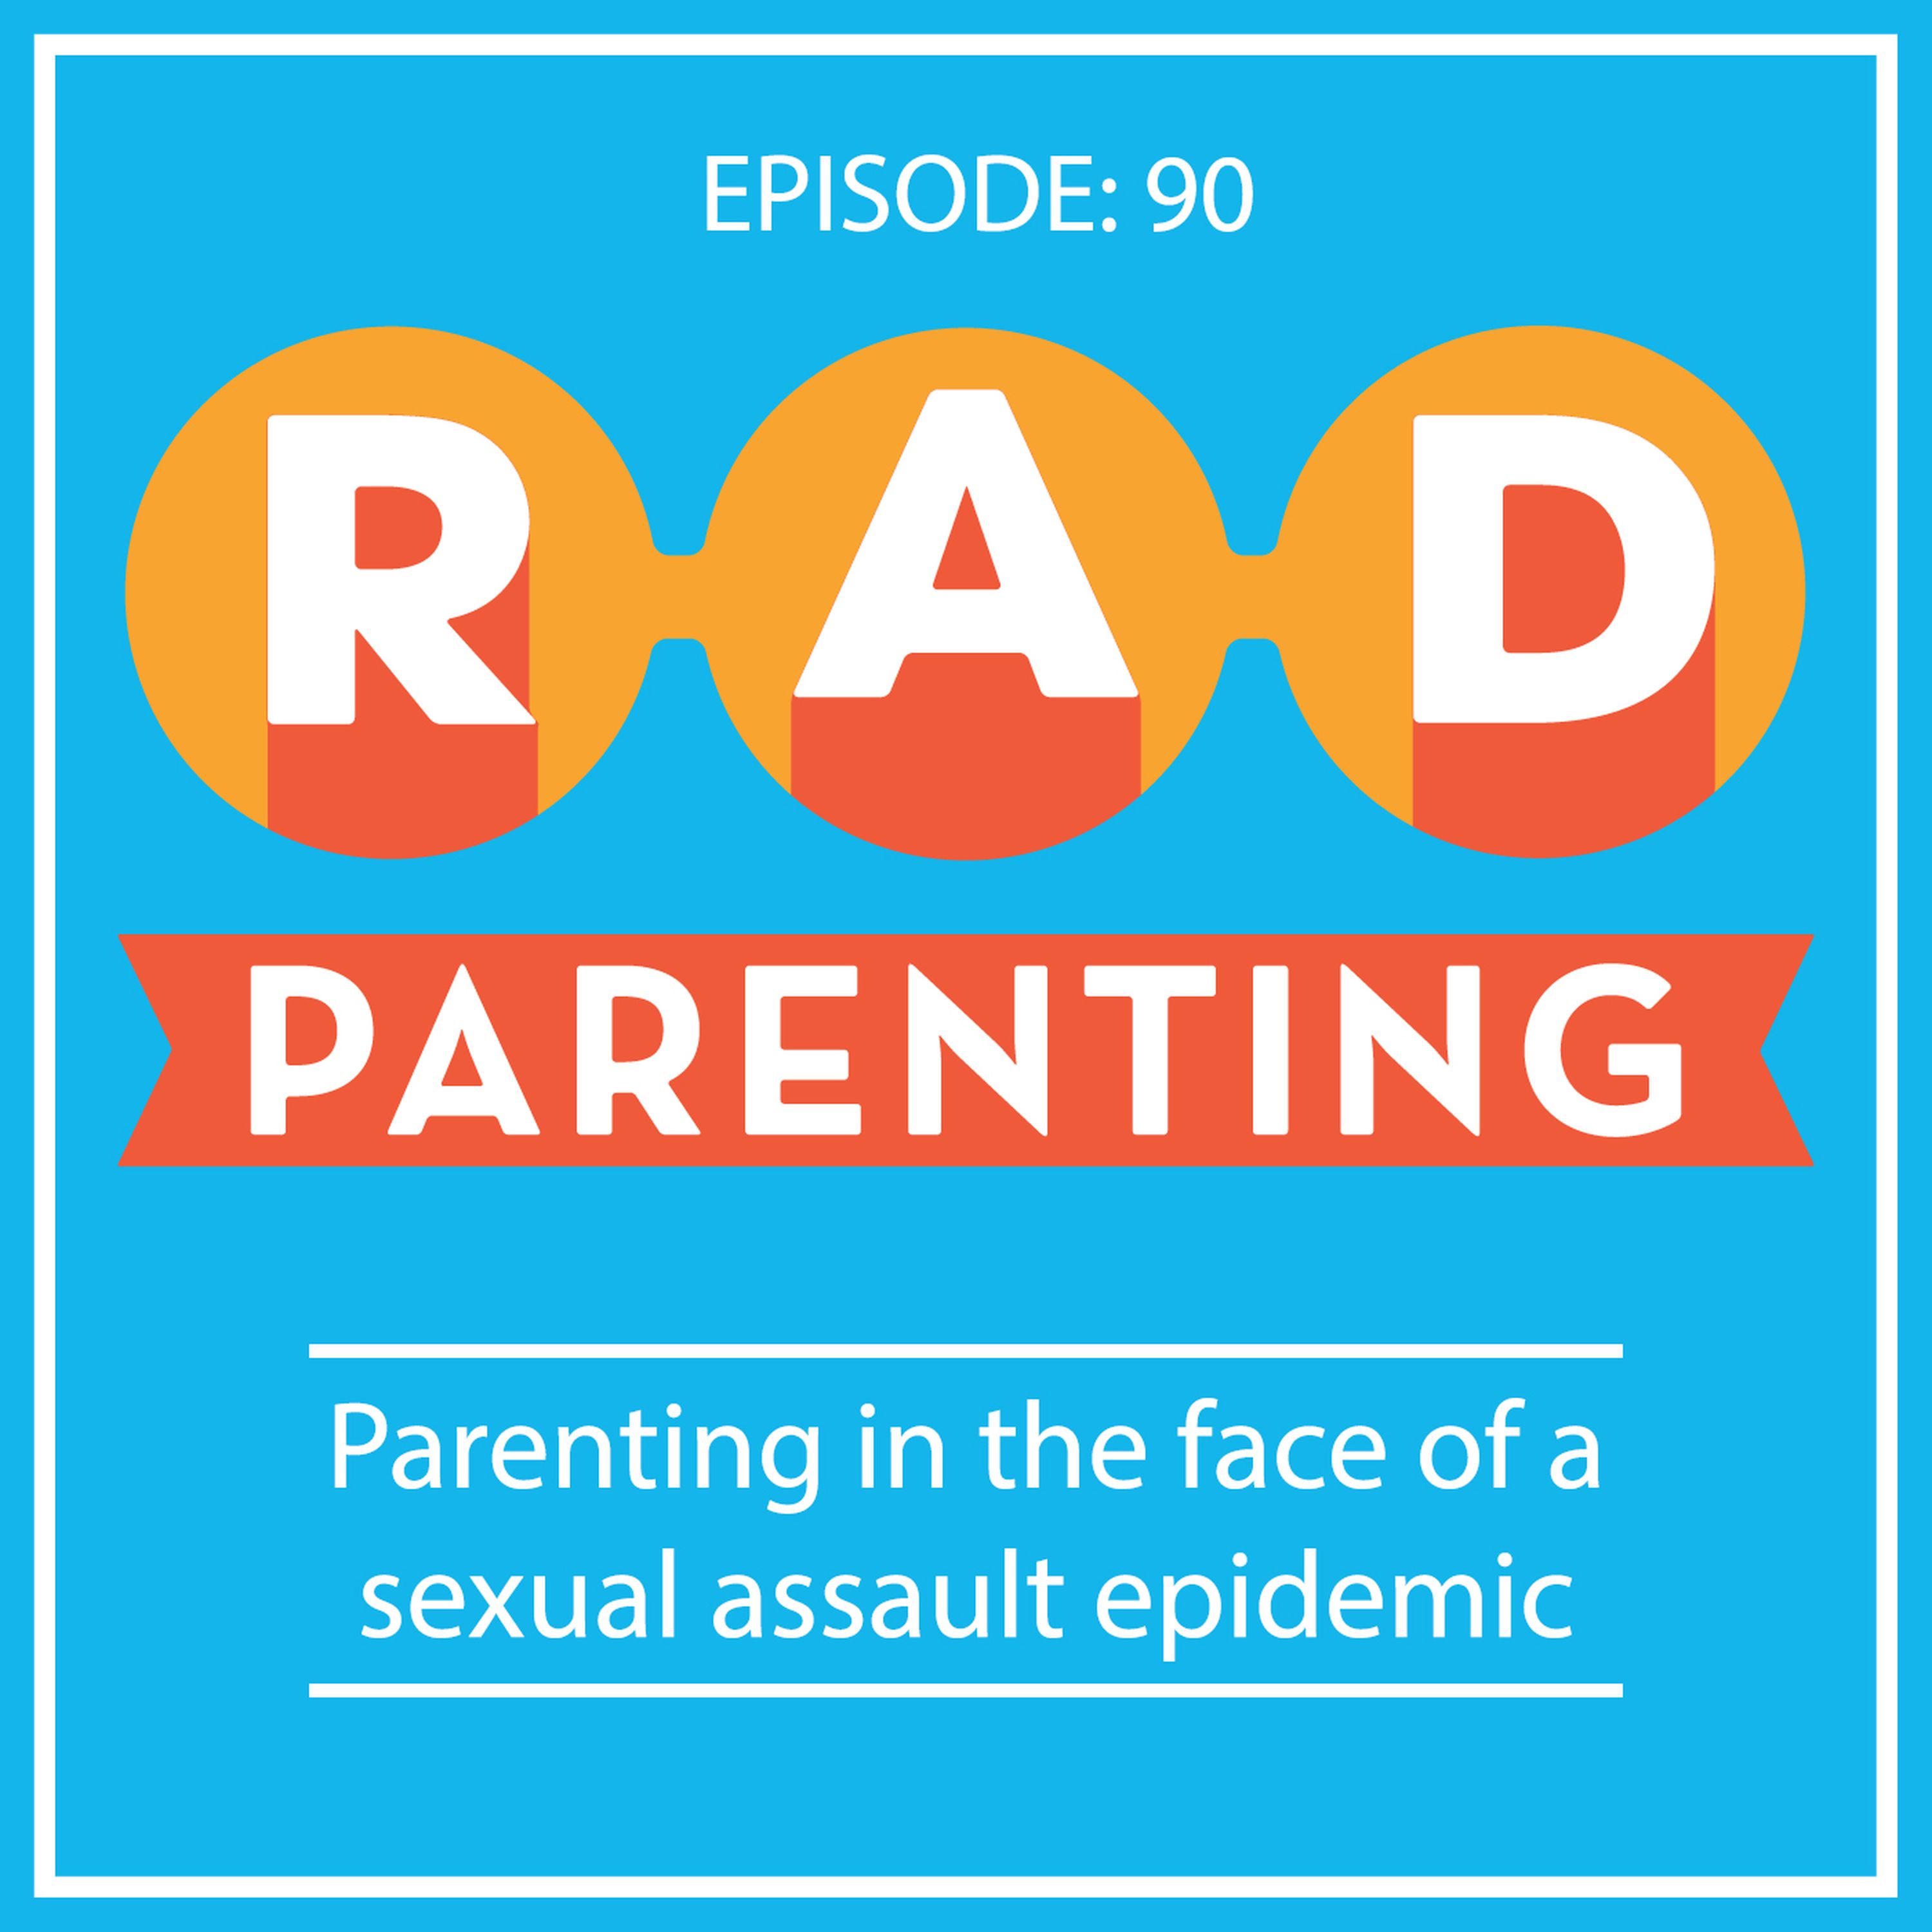 Parenting in the face of a sexual assault epidemic